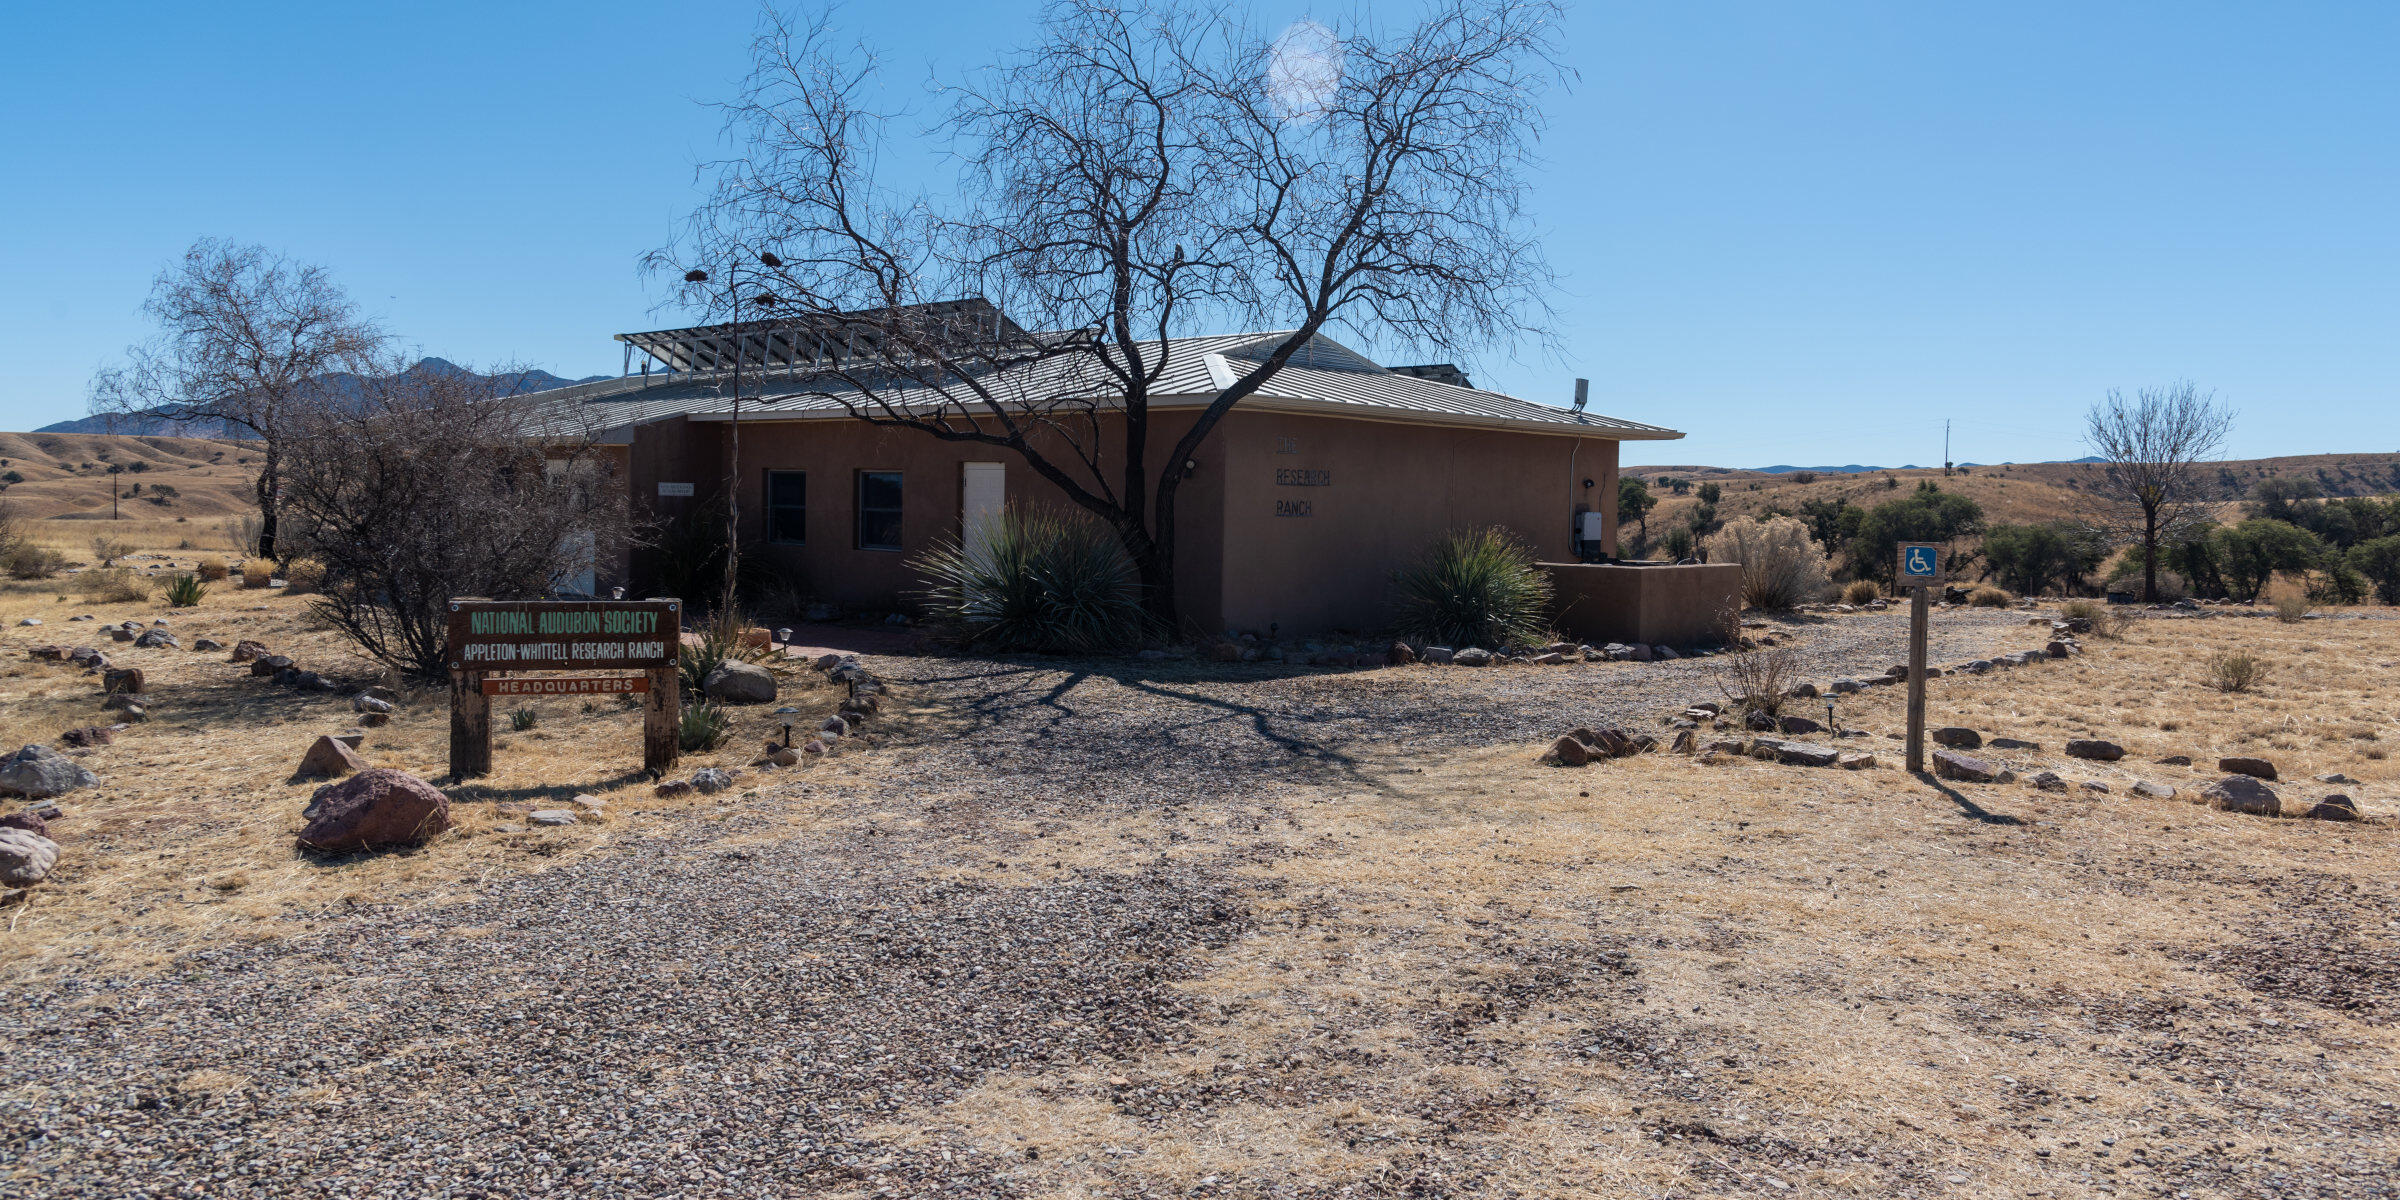 The Appleton-Whittell Research Ranch, a tan building in the middle of a grass and scrubland in southern Arizona.